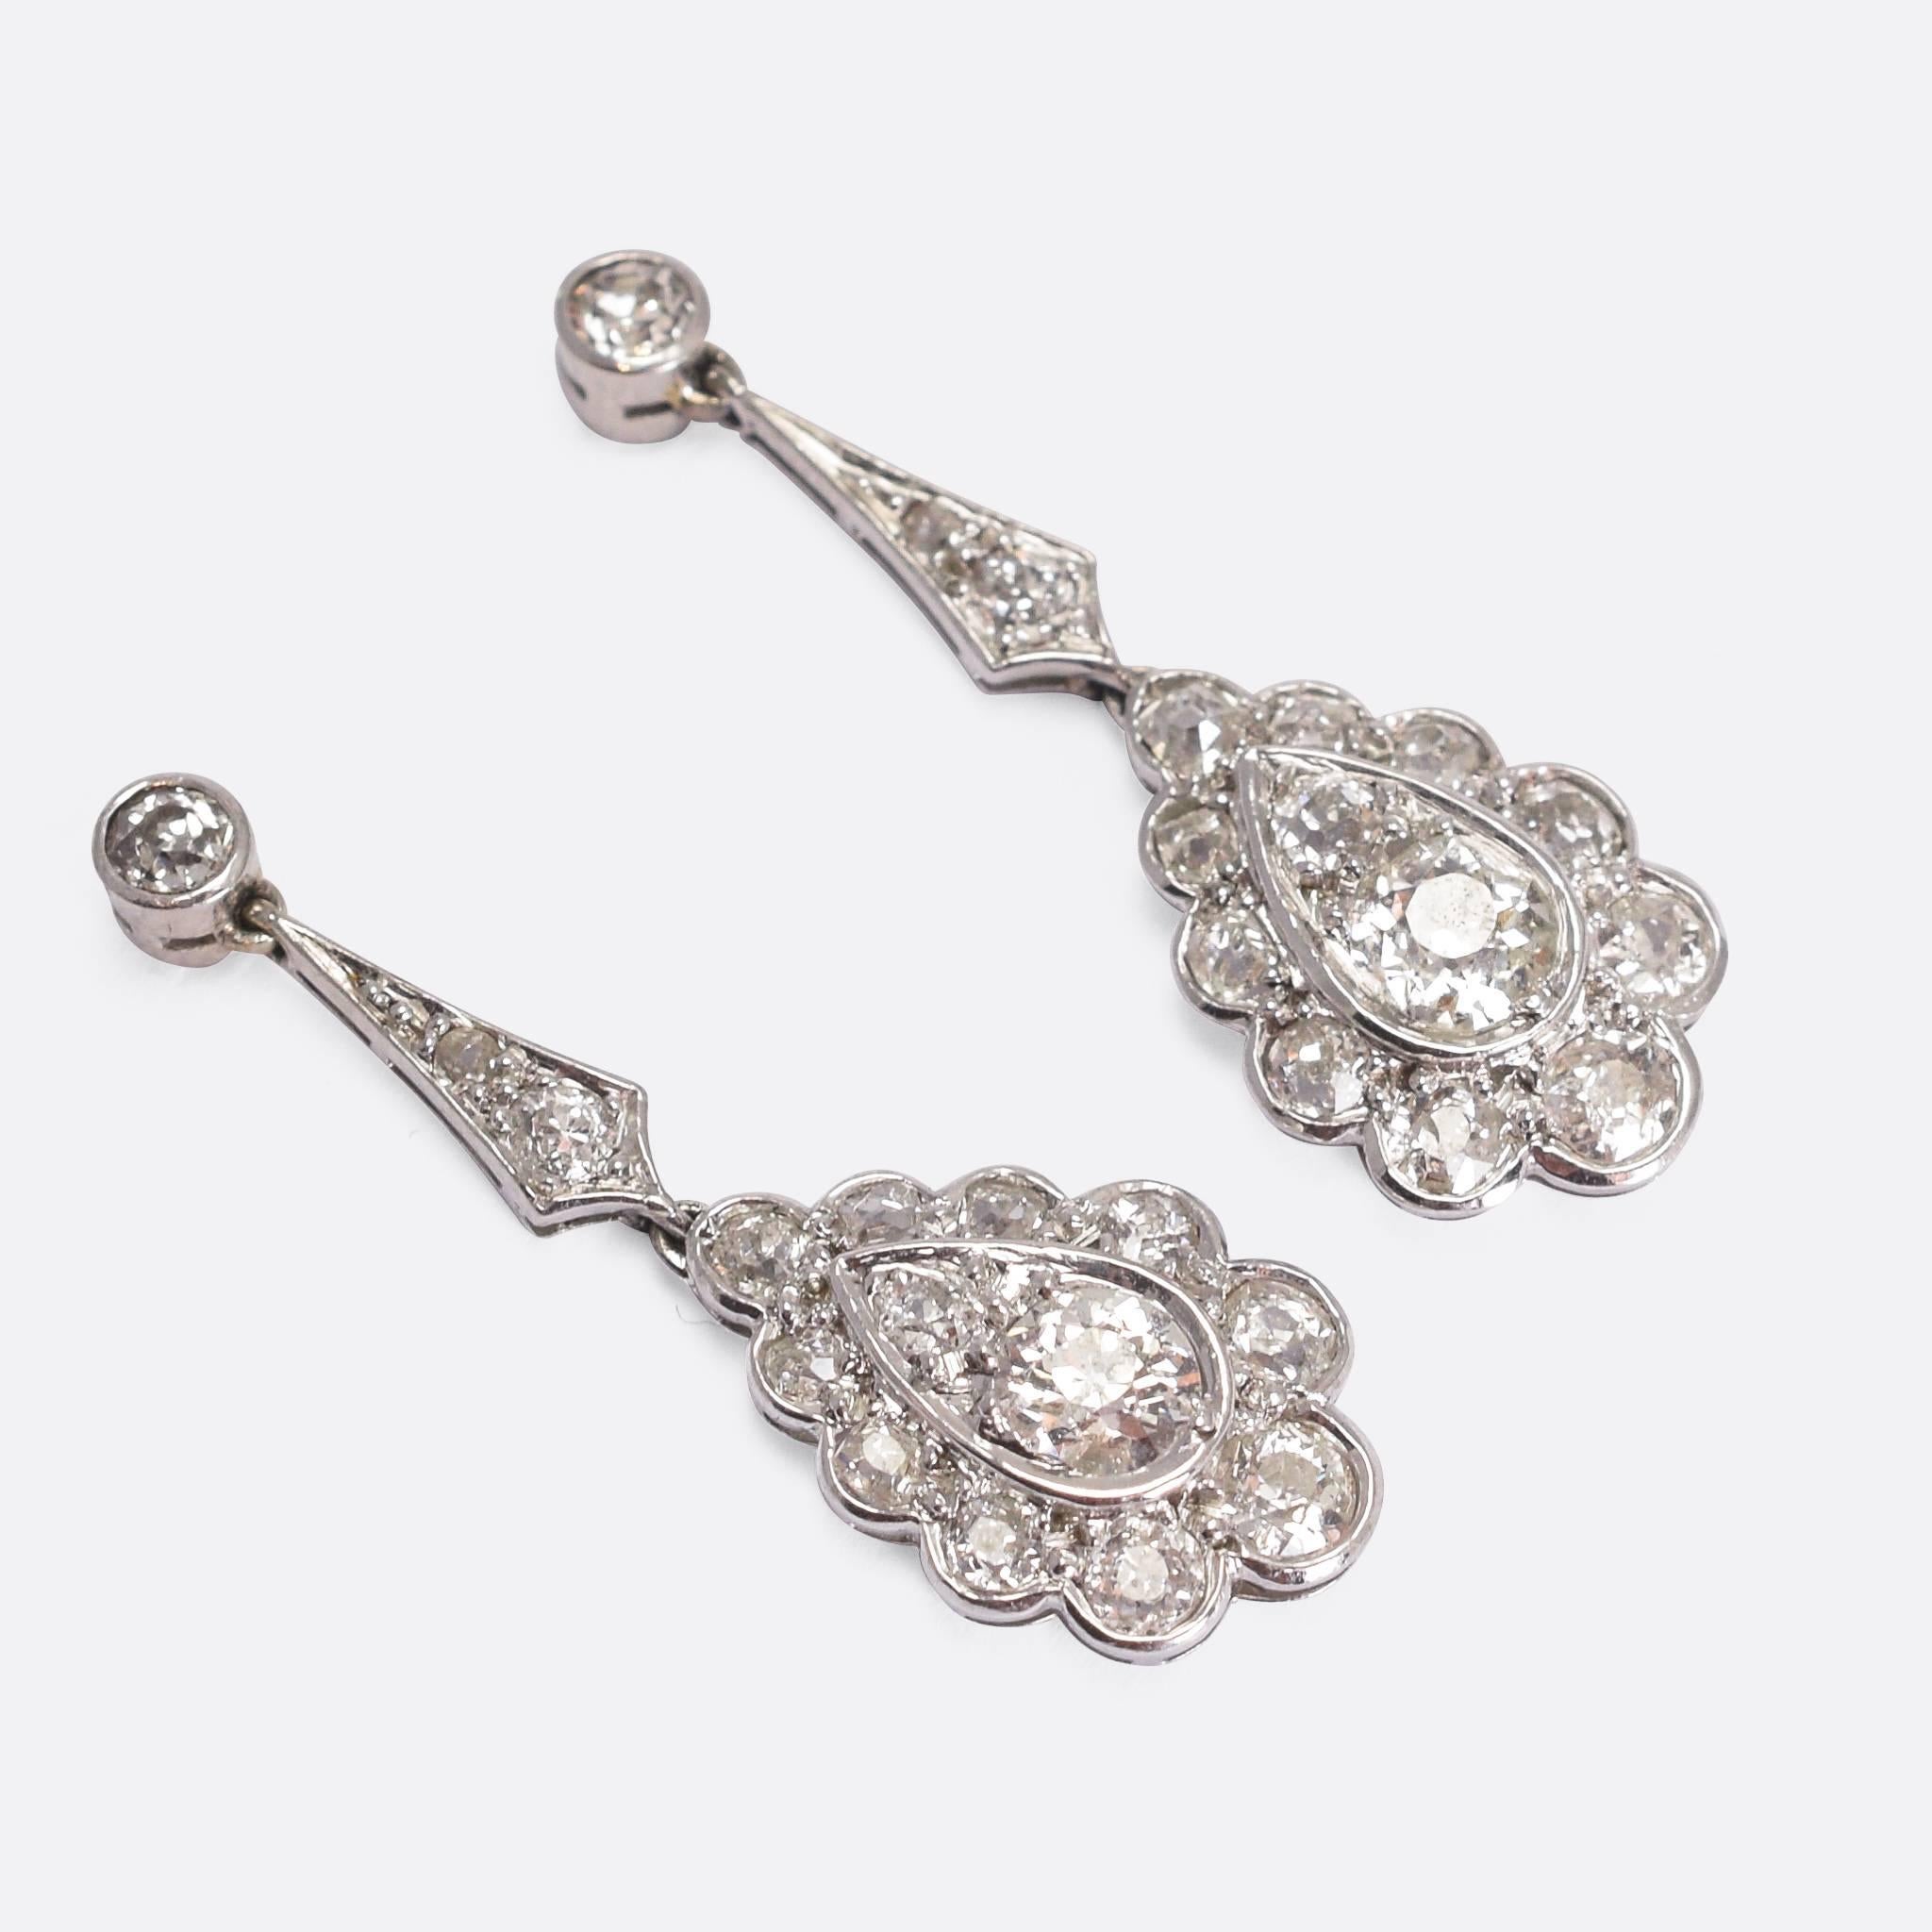 A stunning pair of Edwardian diamond drop earrings, modelled in platinum throughout and each ear set with just over 1 carat of diamonds. Pretty diamond petal-like settings surround central old mine cut stones - all clean and bright with excellent